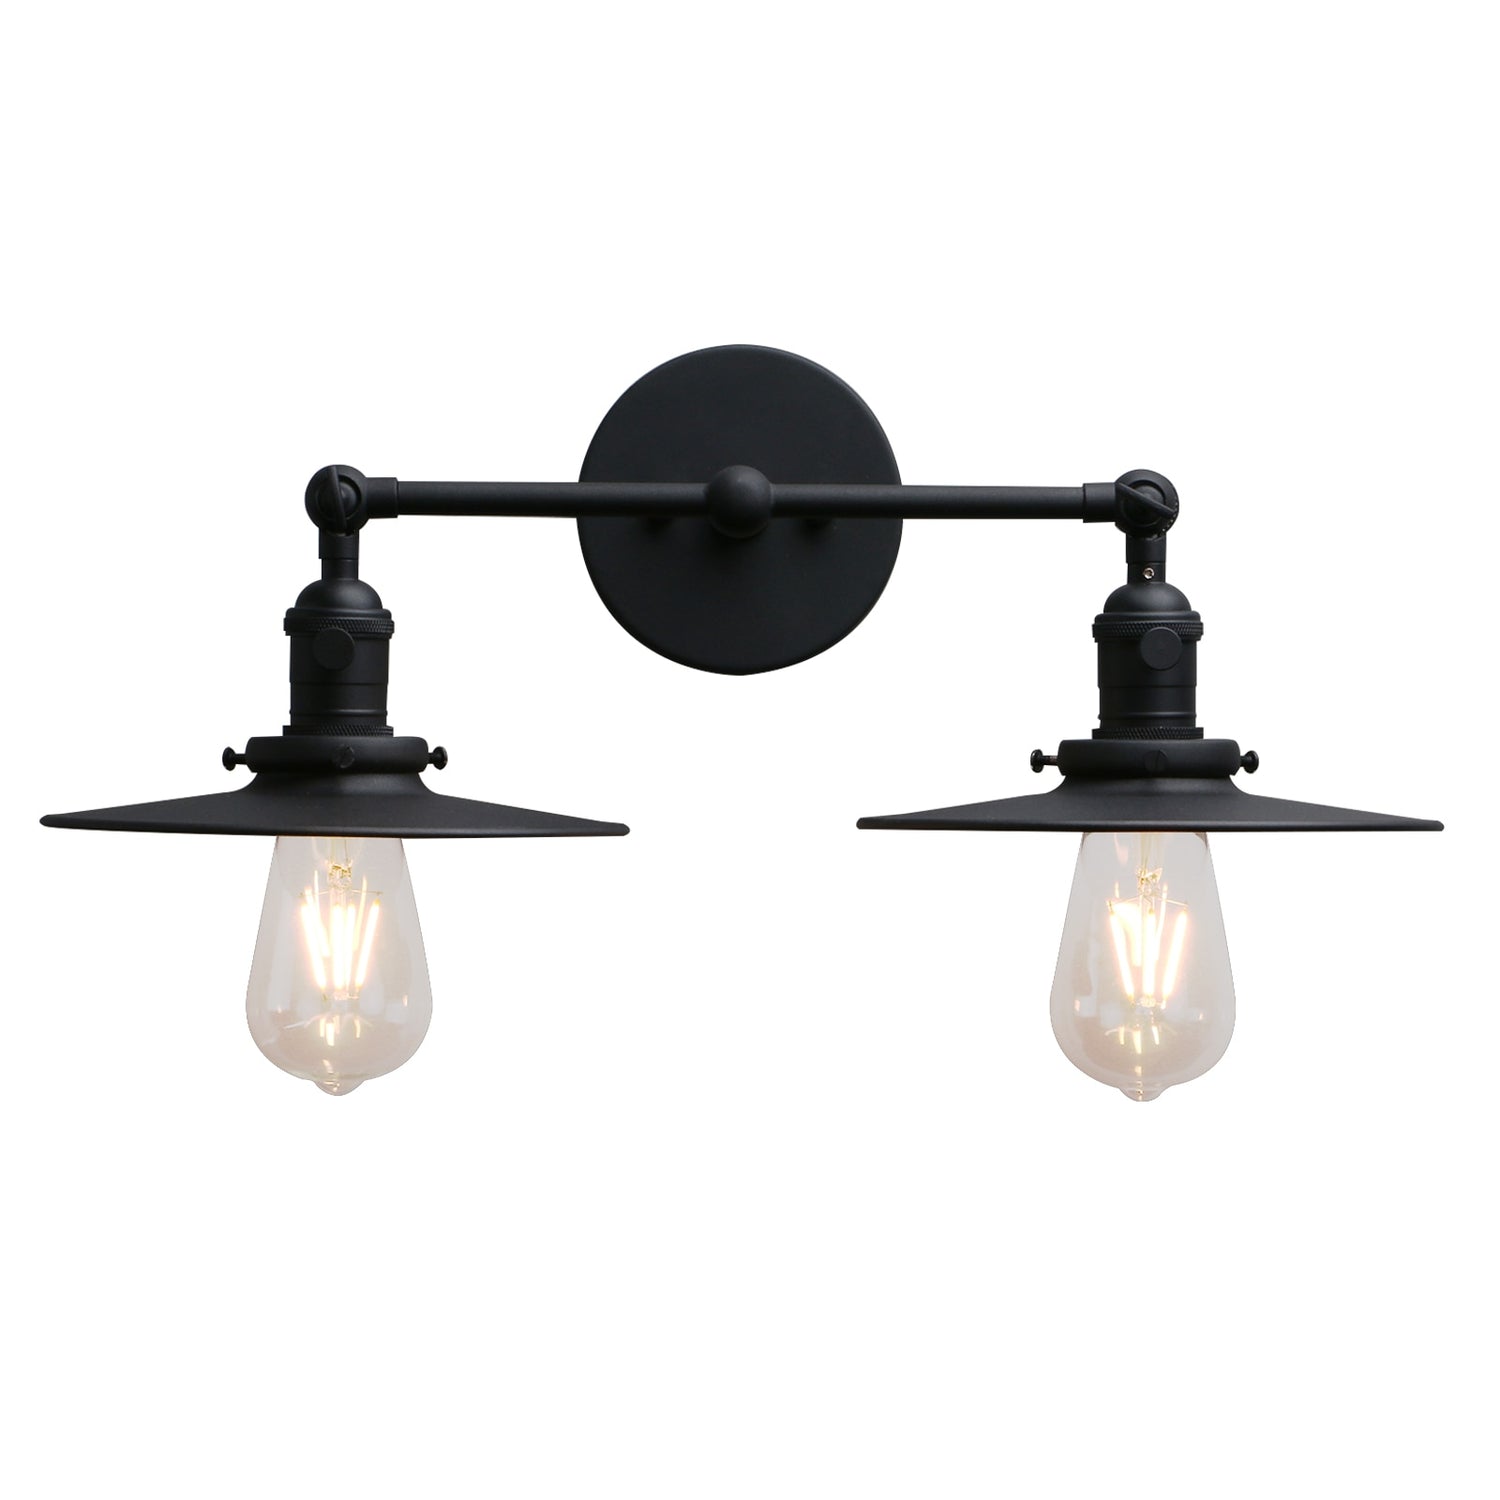 Vintage style double wall sconce with flat shade and edison bulb in black